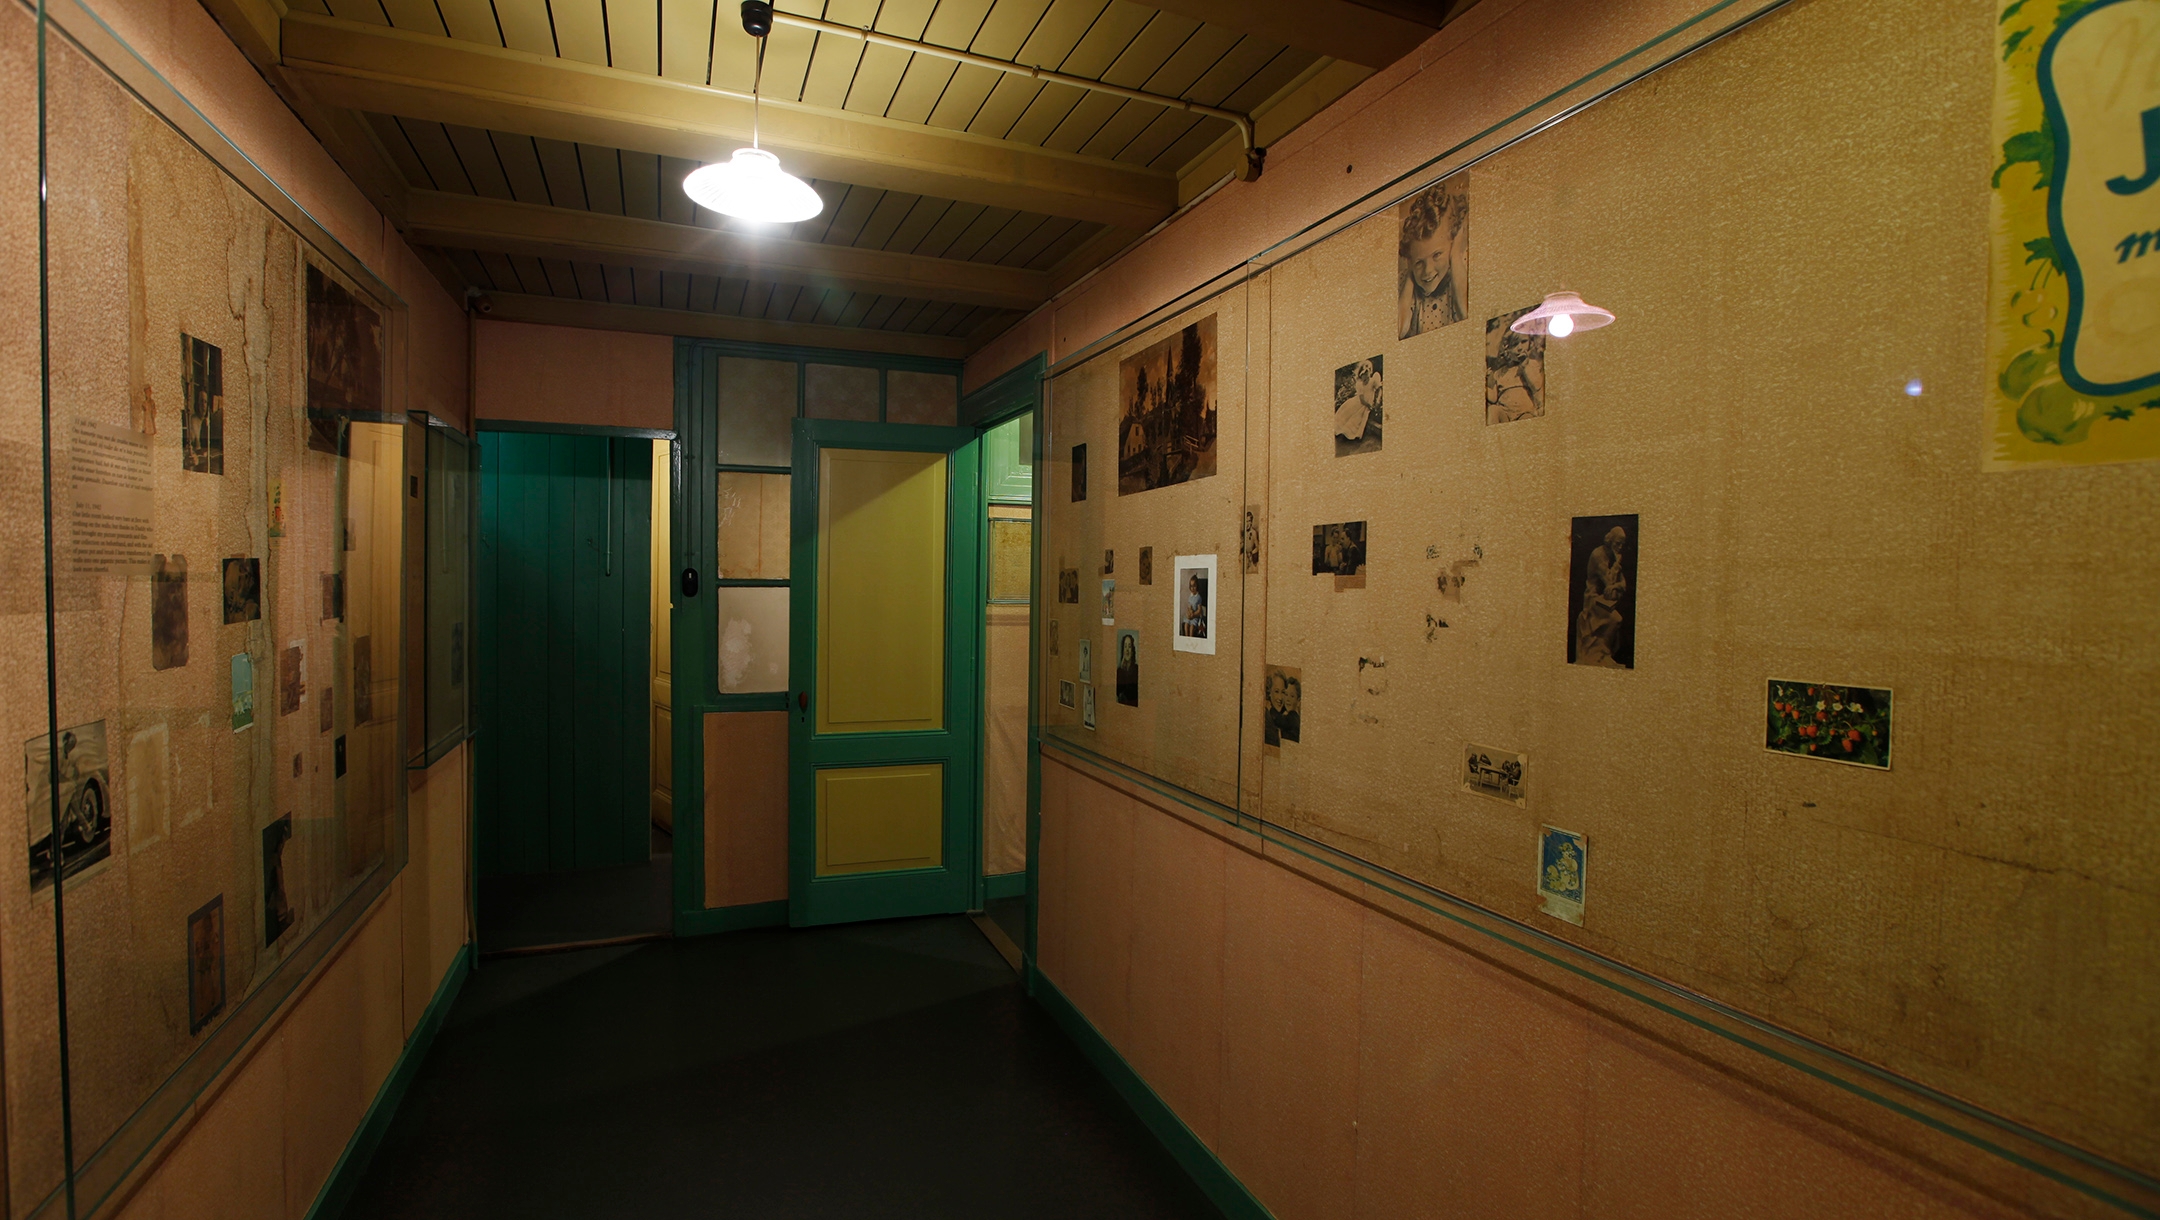 An empty room at the Anne Frank House museum where she and her family hid for two years during the Holocaust in Amsterdam, the Netherlands. (Photo Collection Anne Frank House)